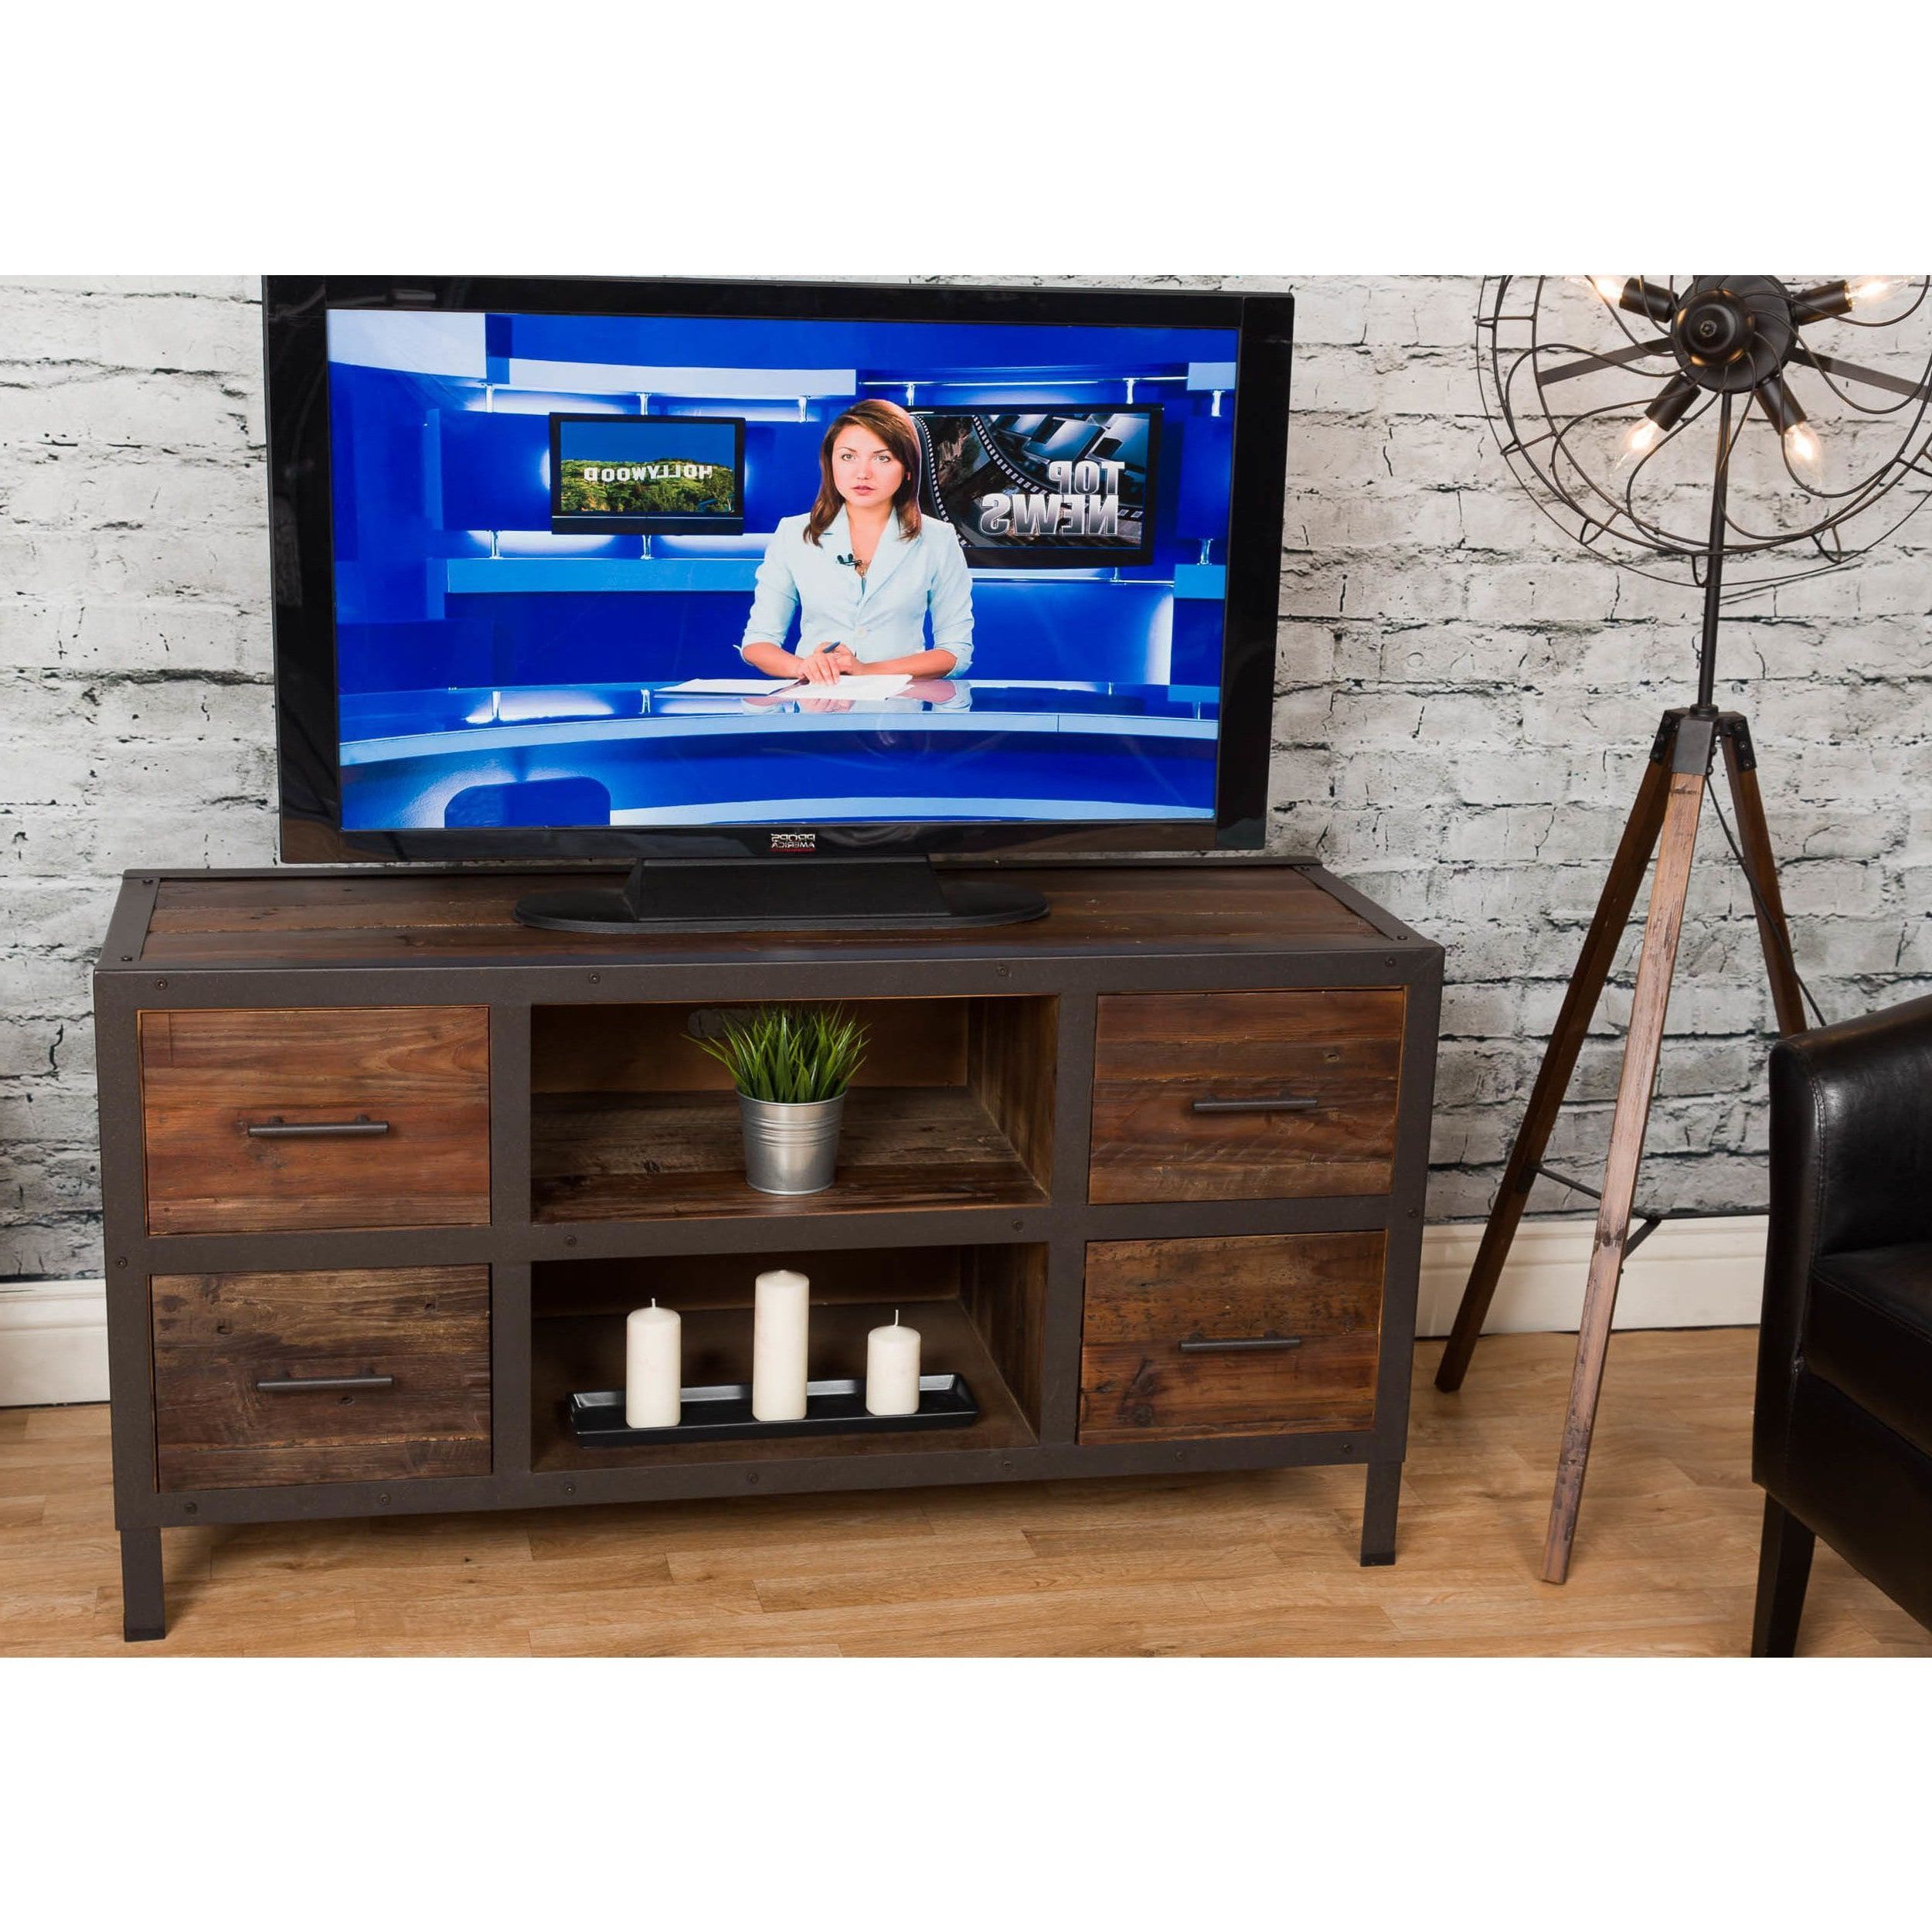 Online Shopping – Bedding, Furniture, Electronics, Jewelry Regarding Urban Rustic Tv Stands (View 16 of 20)